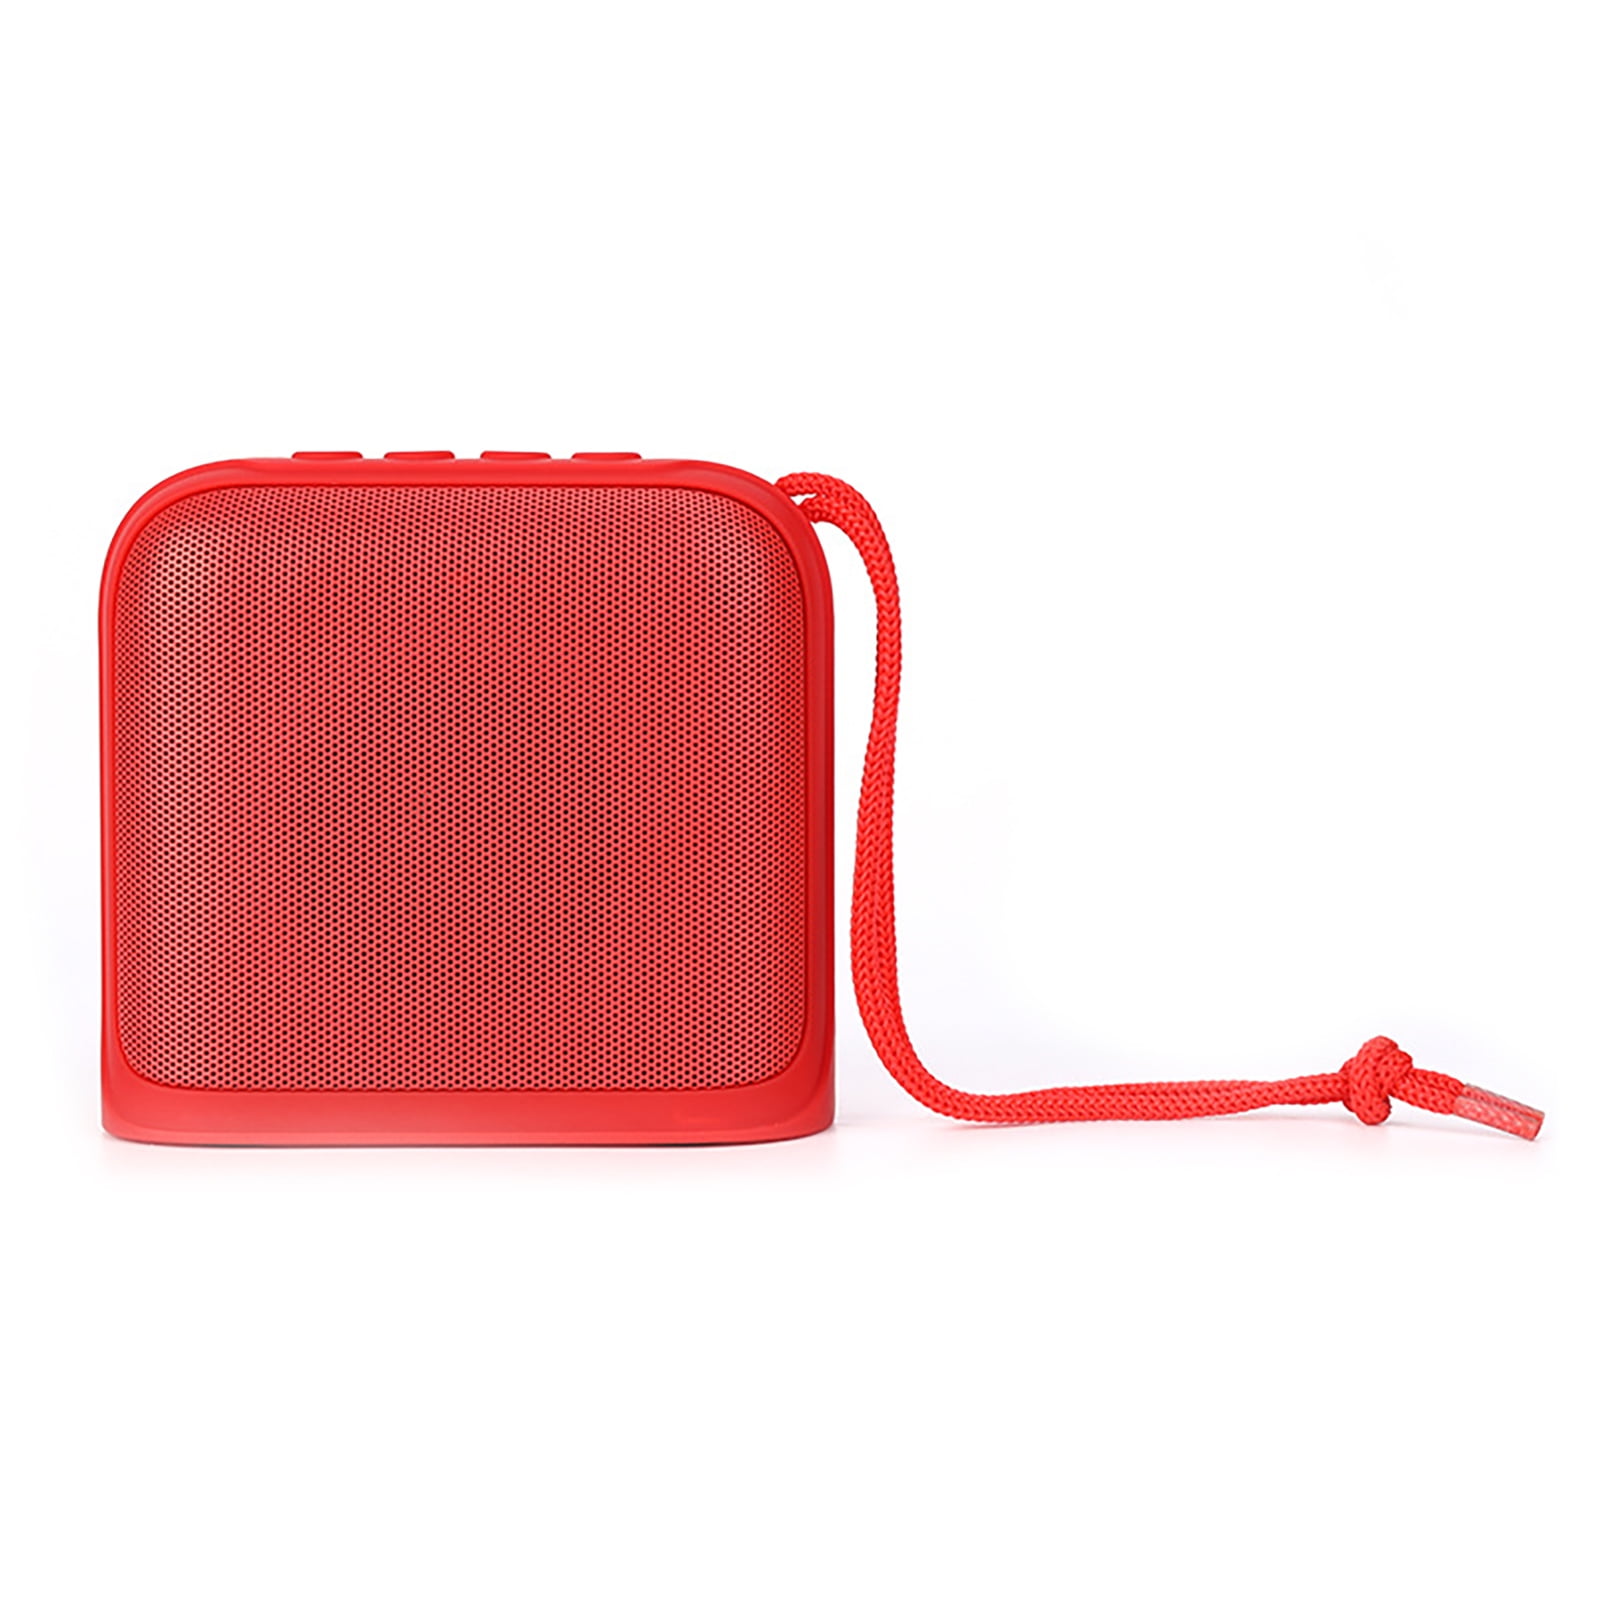 Want to feel the rytheme of music? 🎶 You can bring this mini portable, JBL  GO 3